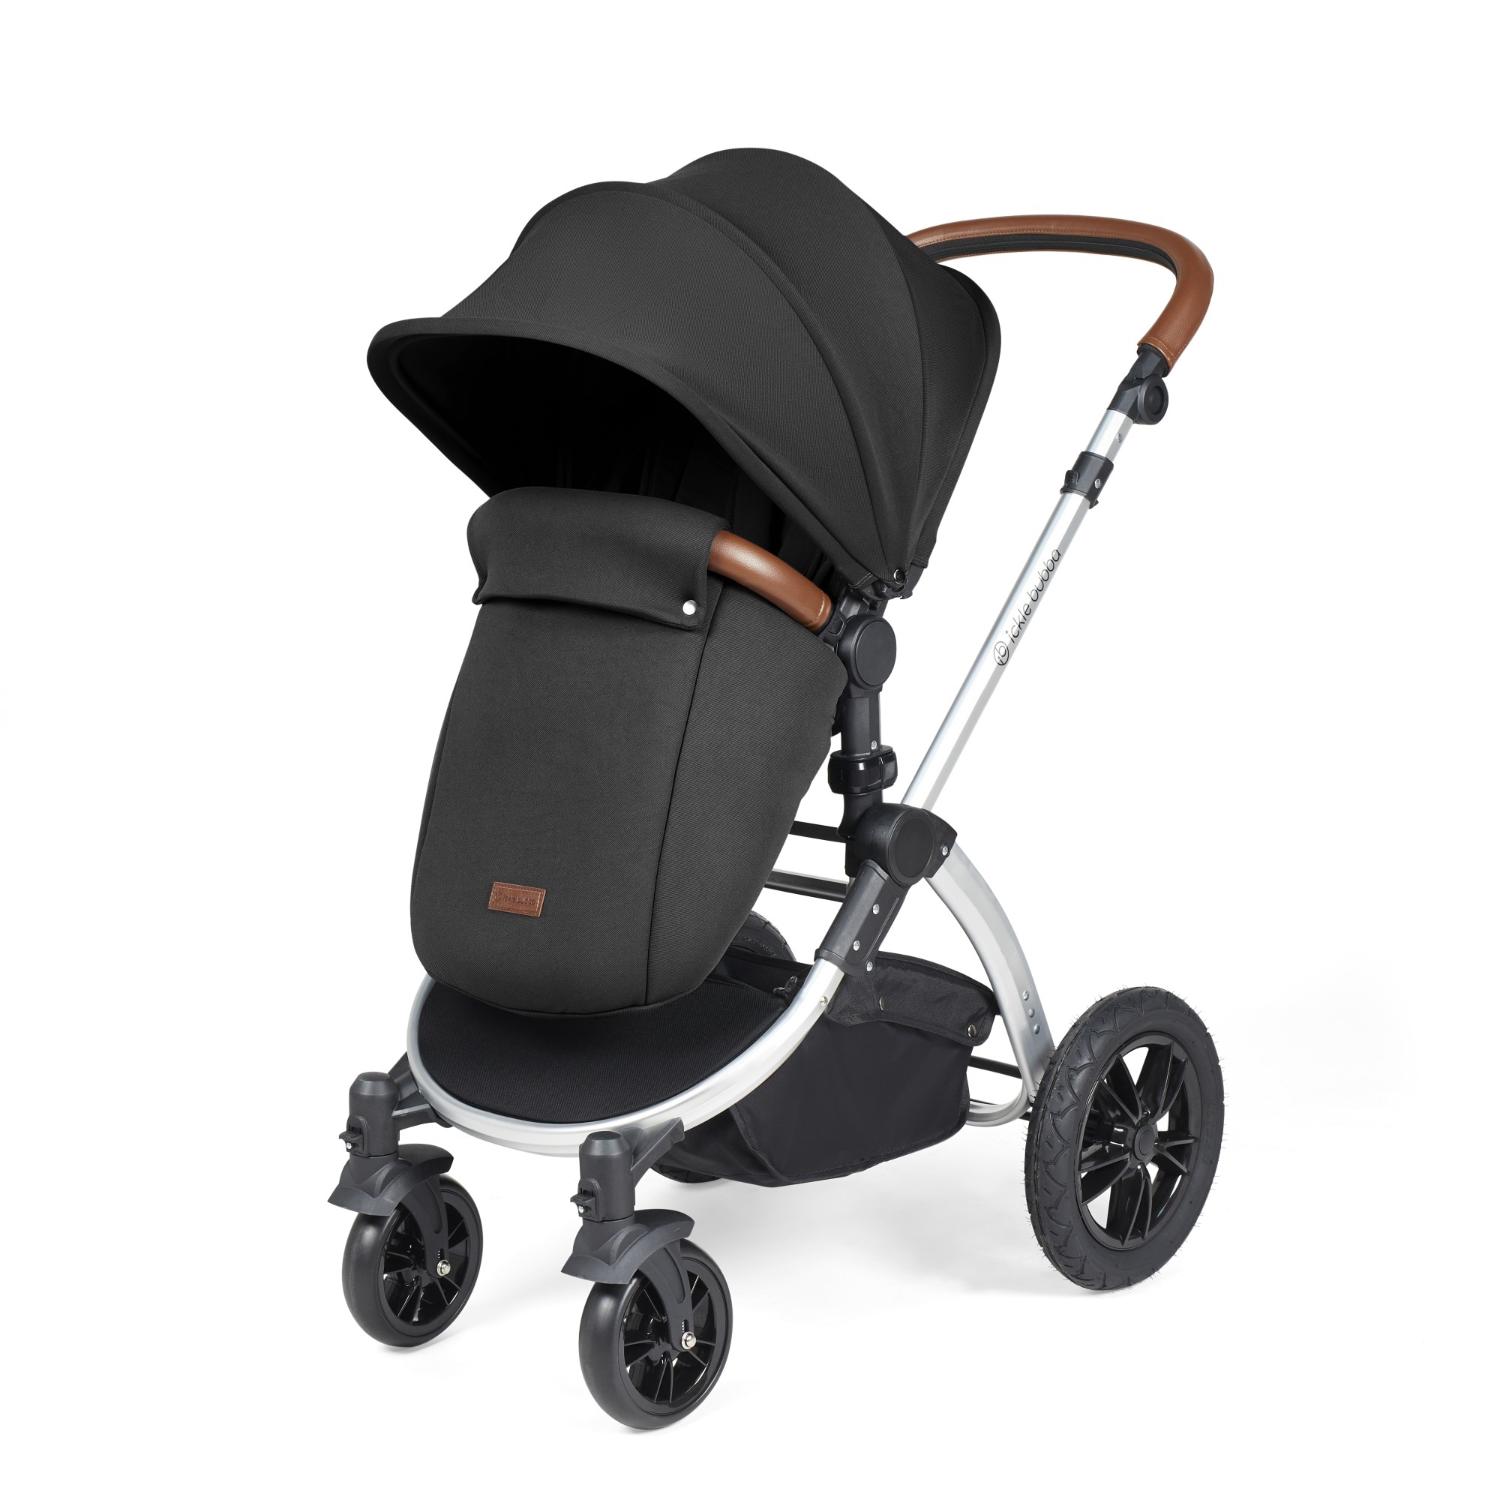 Ickle Bubba Stomp Luxe Pushchair with foot warmer attached in Midnight black colour with silver chassis and tan handle